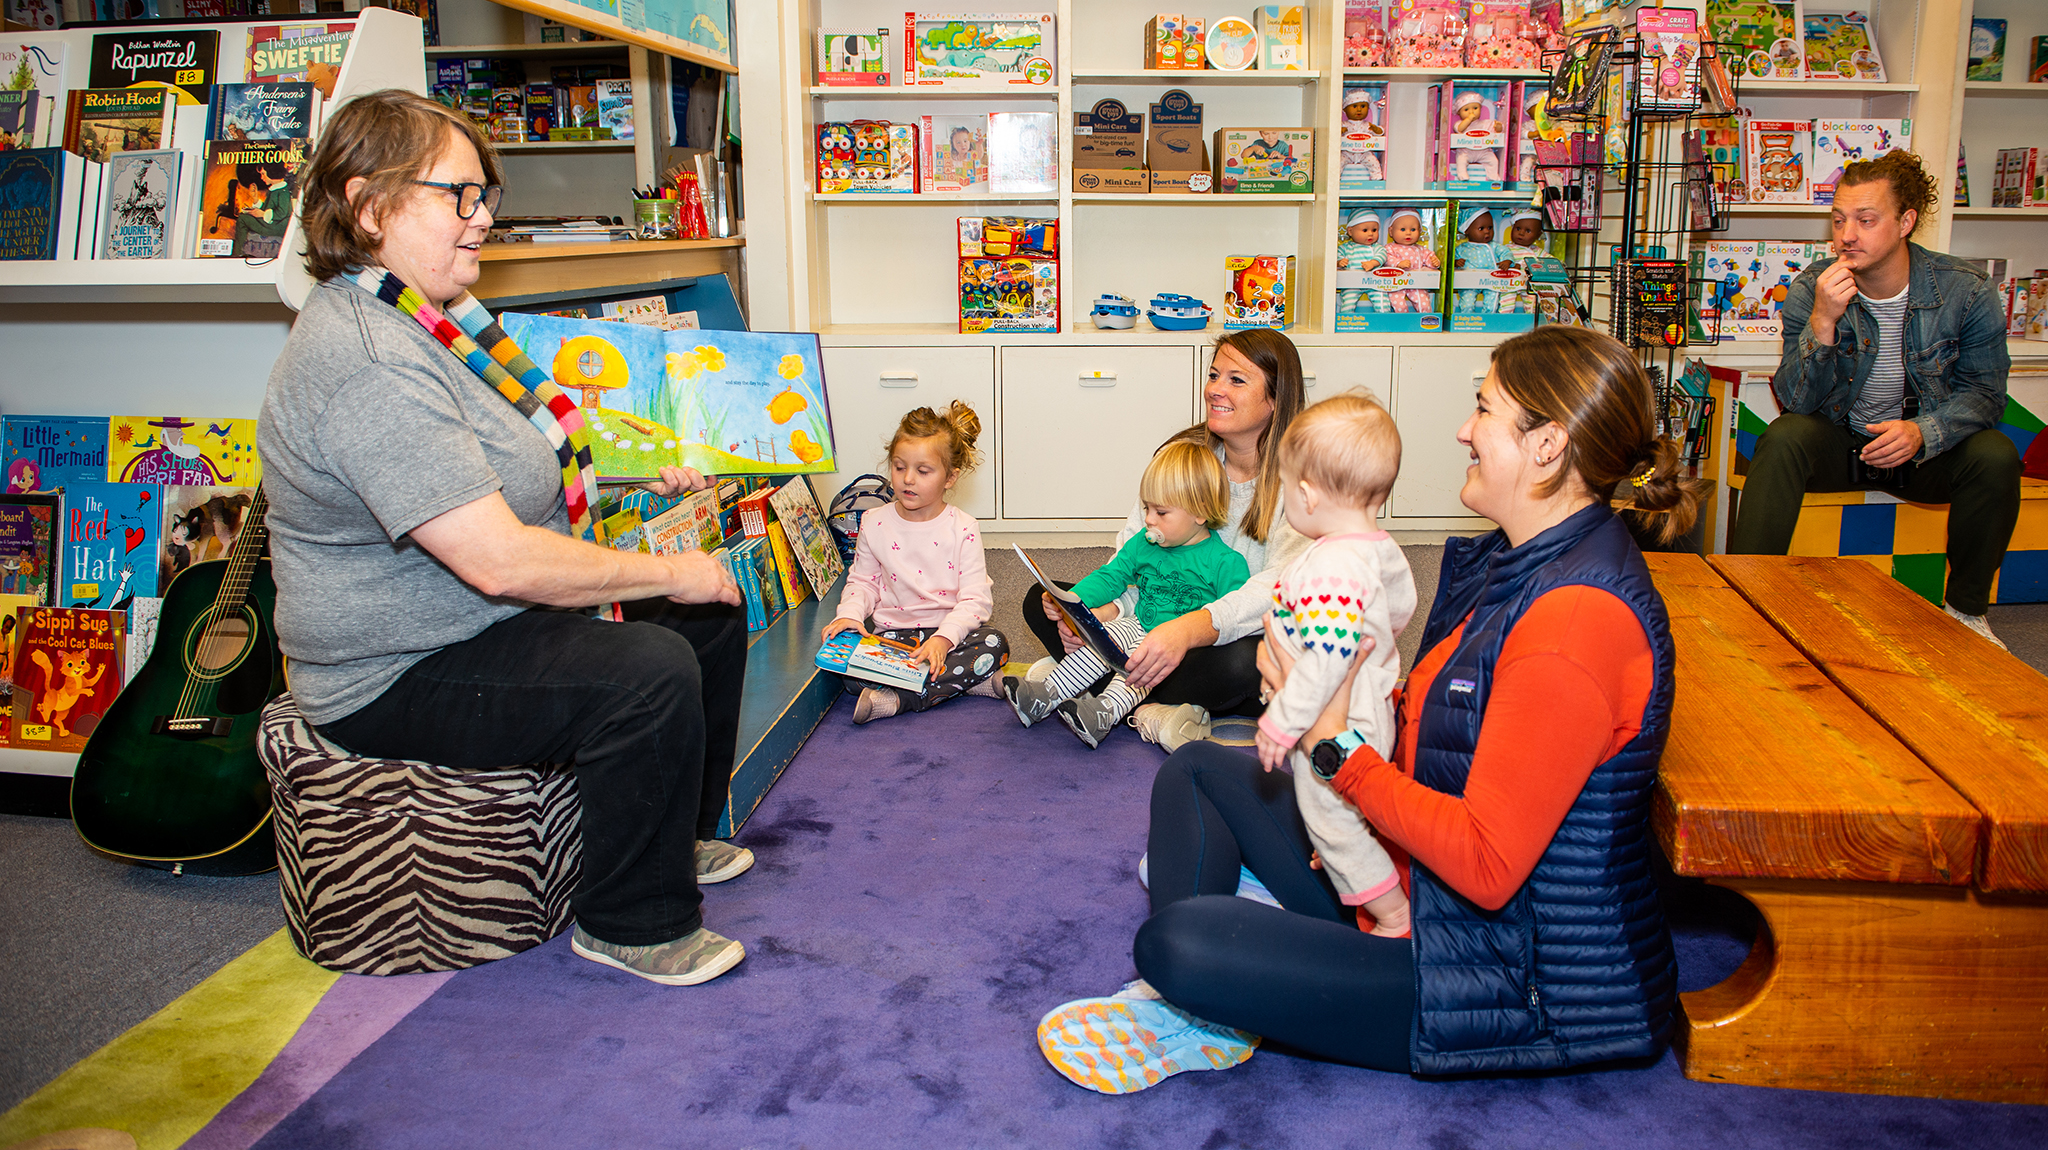 Jilleen Moore (left) leads story time at Square Books Jr. in Oxford with Juniper Dutson, Benjamin and Michele Ard, Anne Carter and Sarah Abraham, and Dylan Dutson. Just like story time, the Children’s Book Festival at the university encourages a love of reading, and the festival has received major support from the family of the late Elaine Hoffman Scott of Little Rock, Arkansas. Scott believed that ‘every person should have the chance to experience everything books can bring,’ daughter Melissa Scott says. Photo by Bill Dabney/UM Foundation